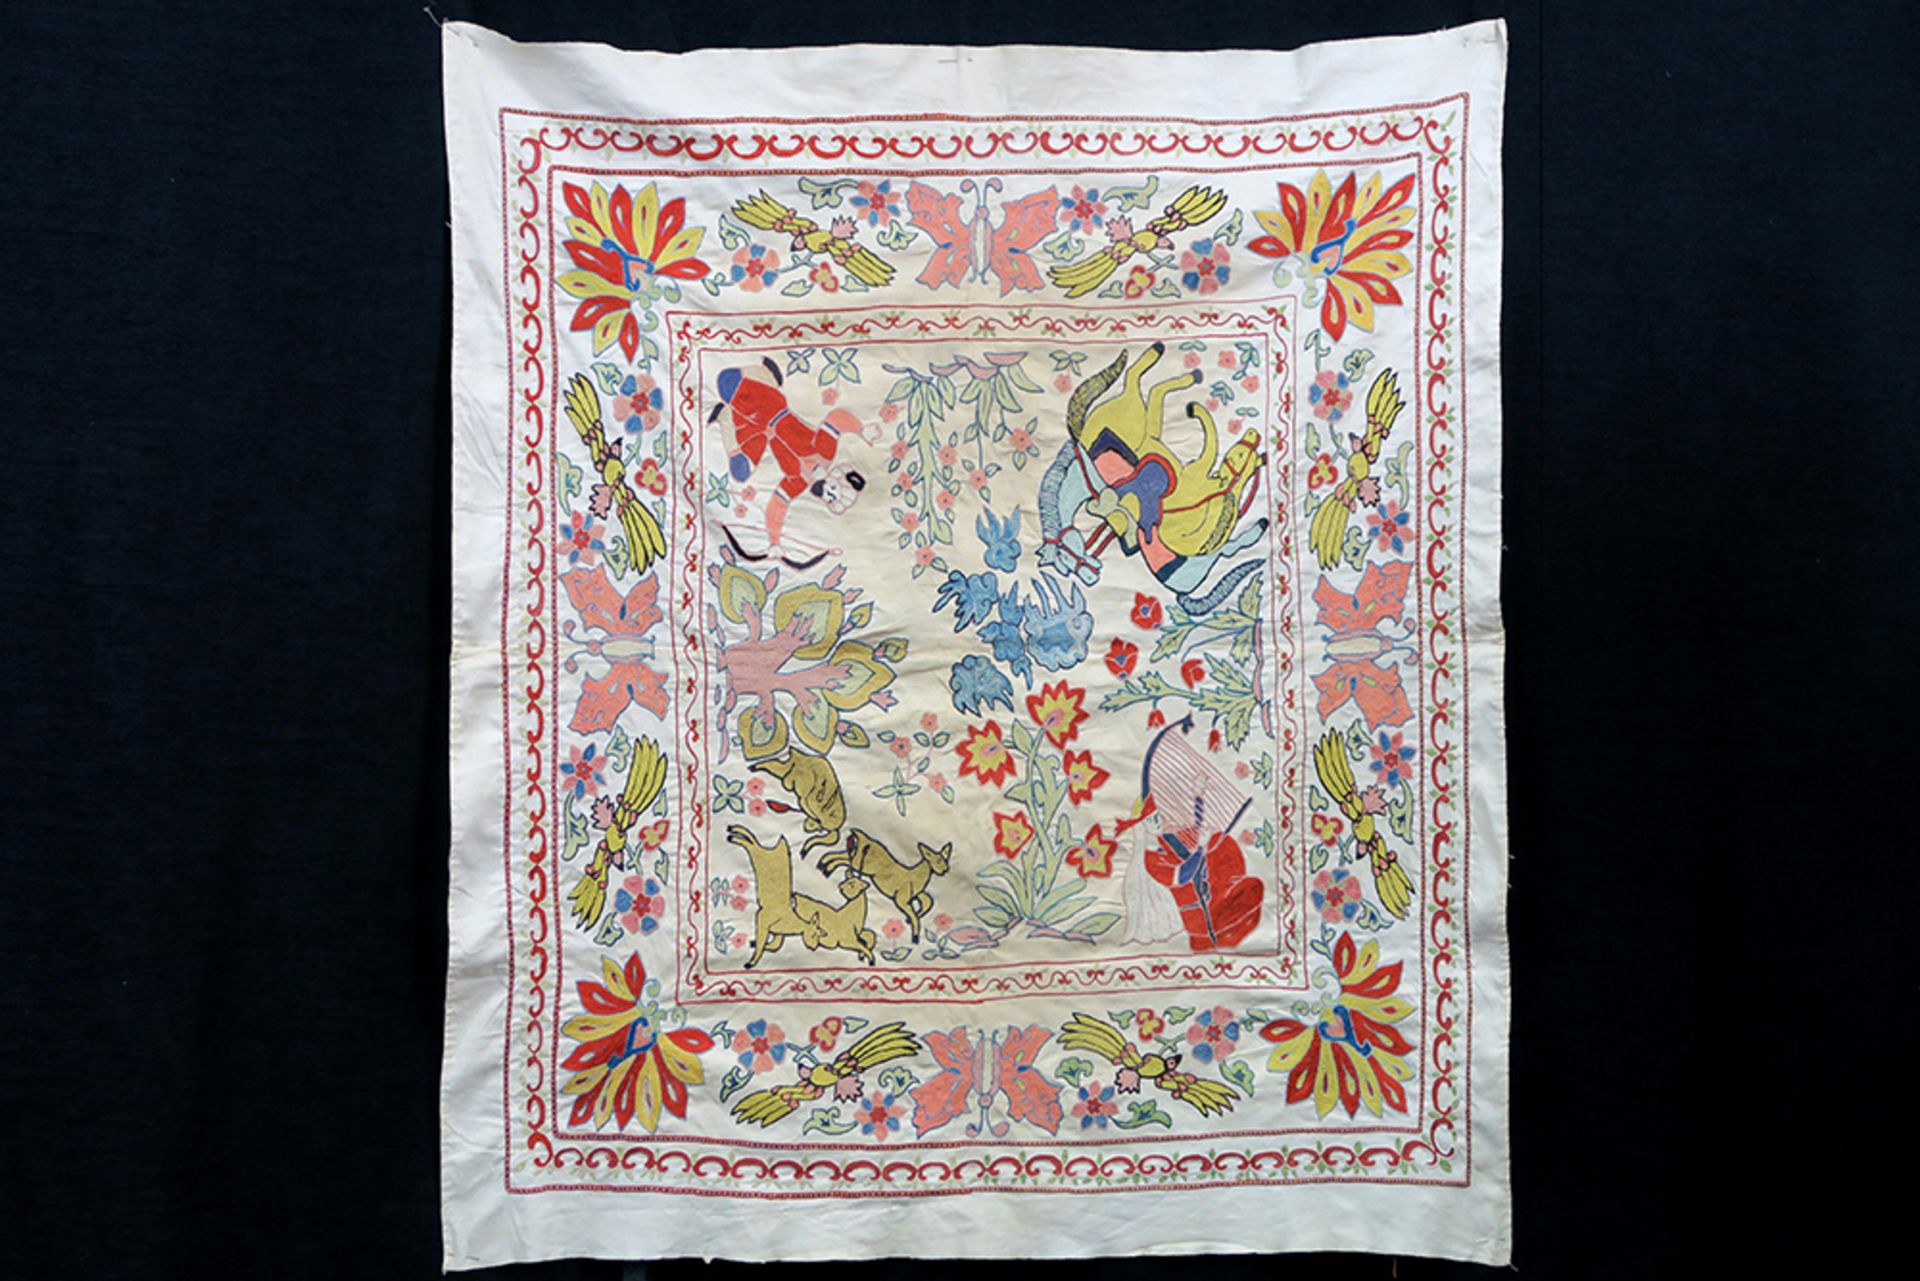 19/20th Cent. Persian Qajar textile fragment in linen with figures in a hunting scene surrounded